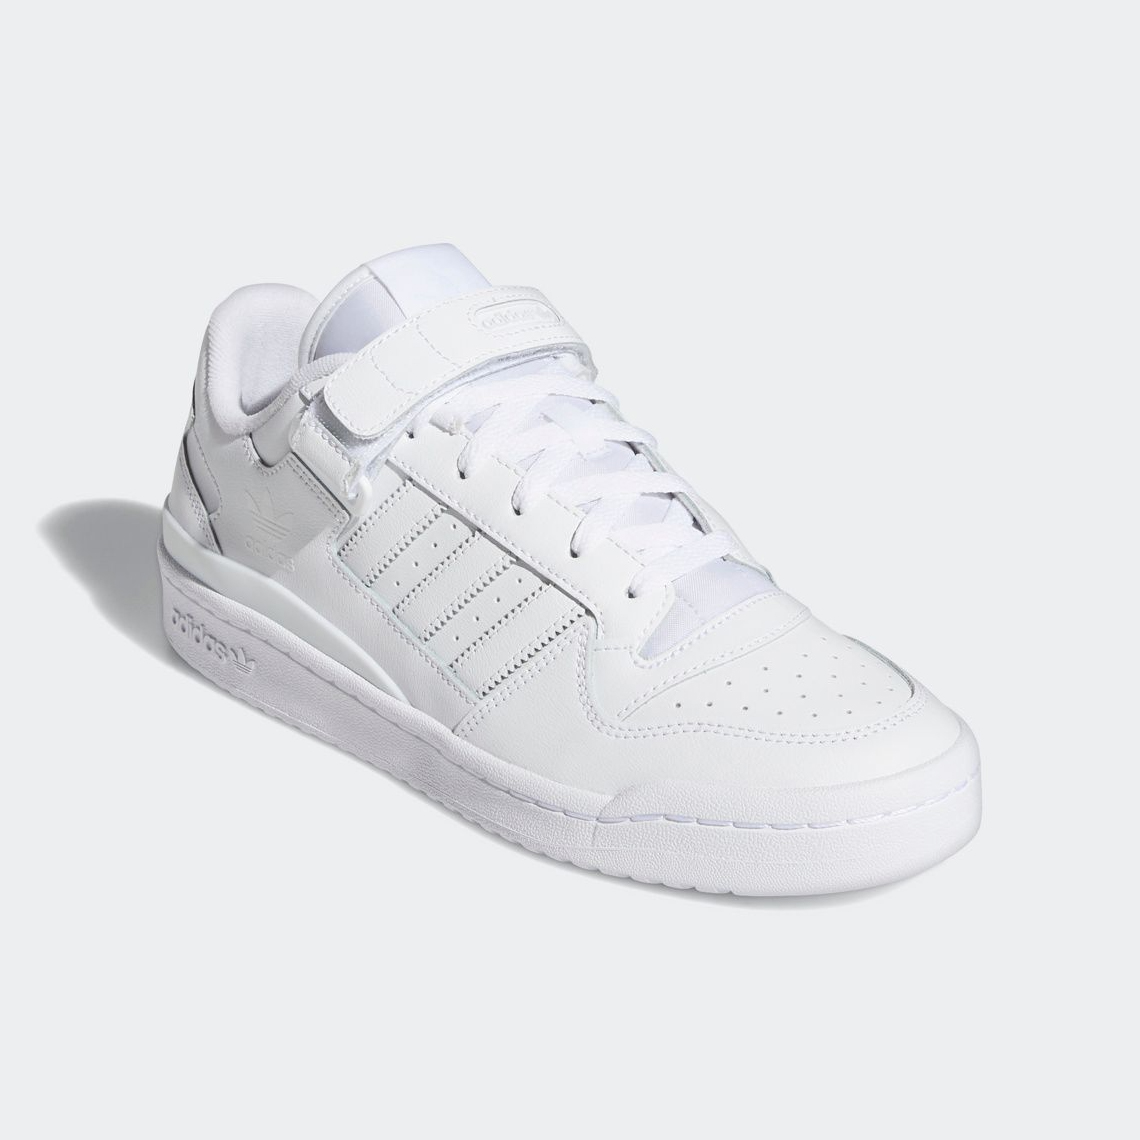 adidas Forum Lo Triple White FY7755 Release Date | SneakerNews.com